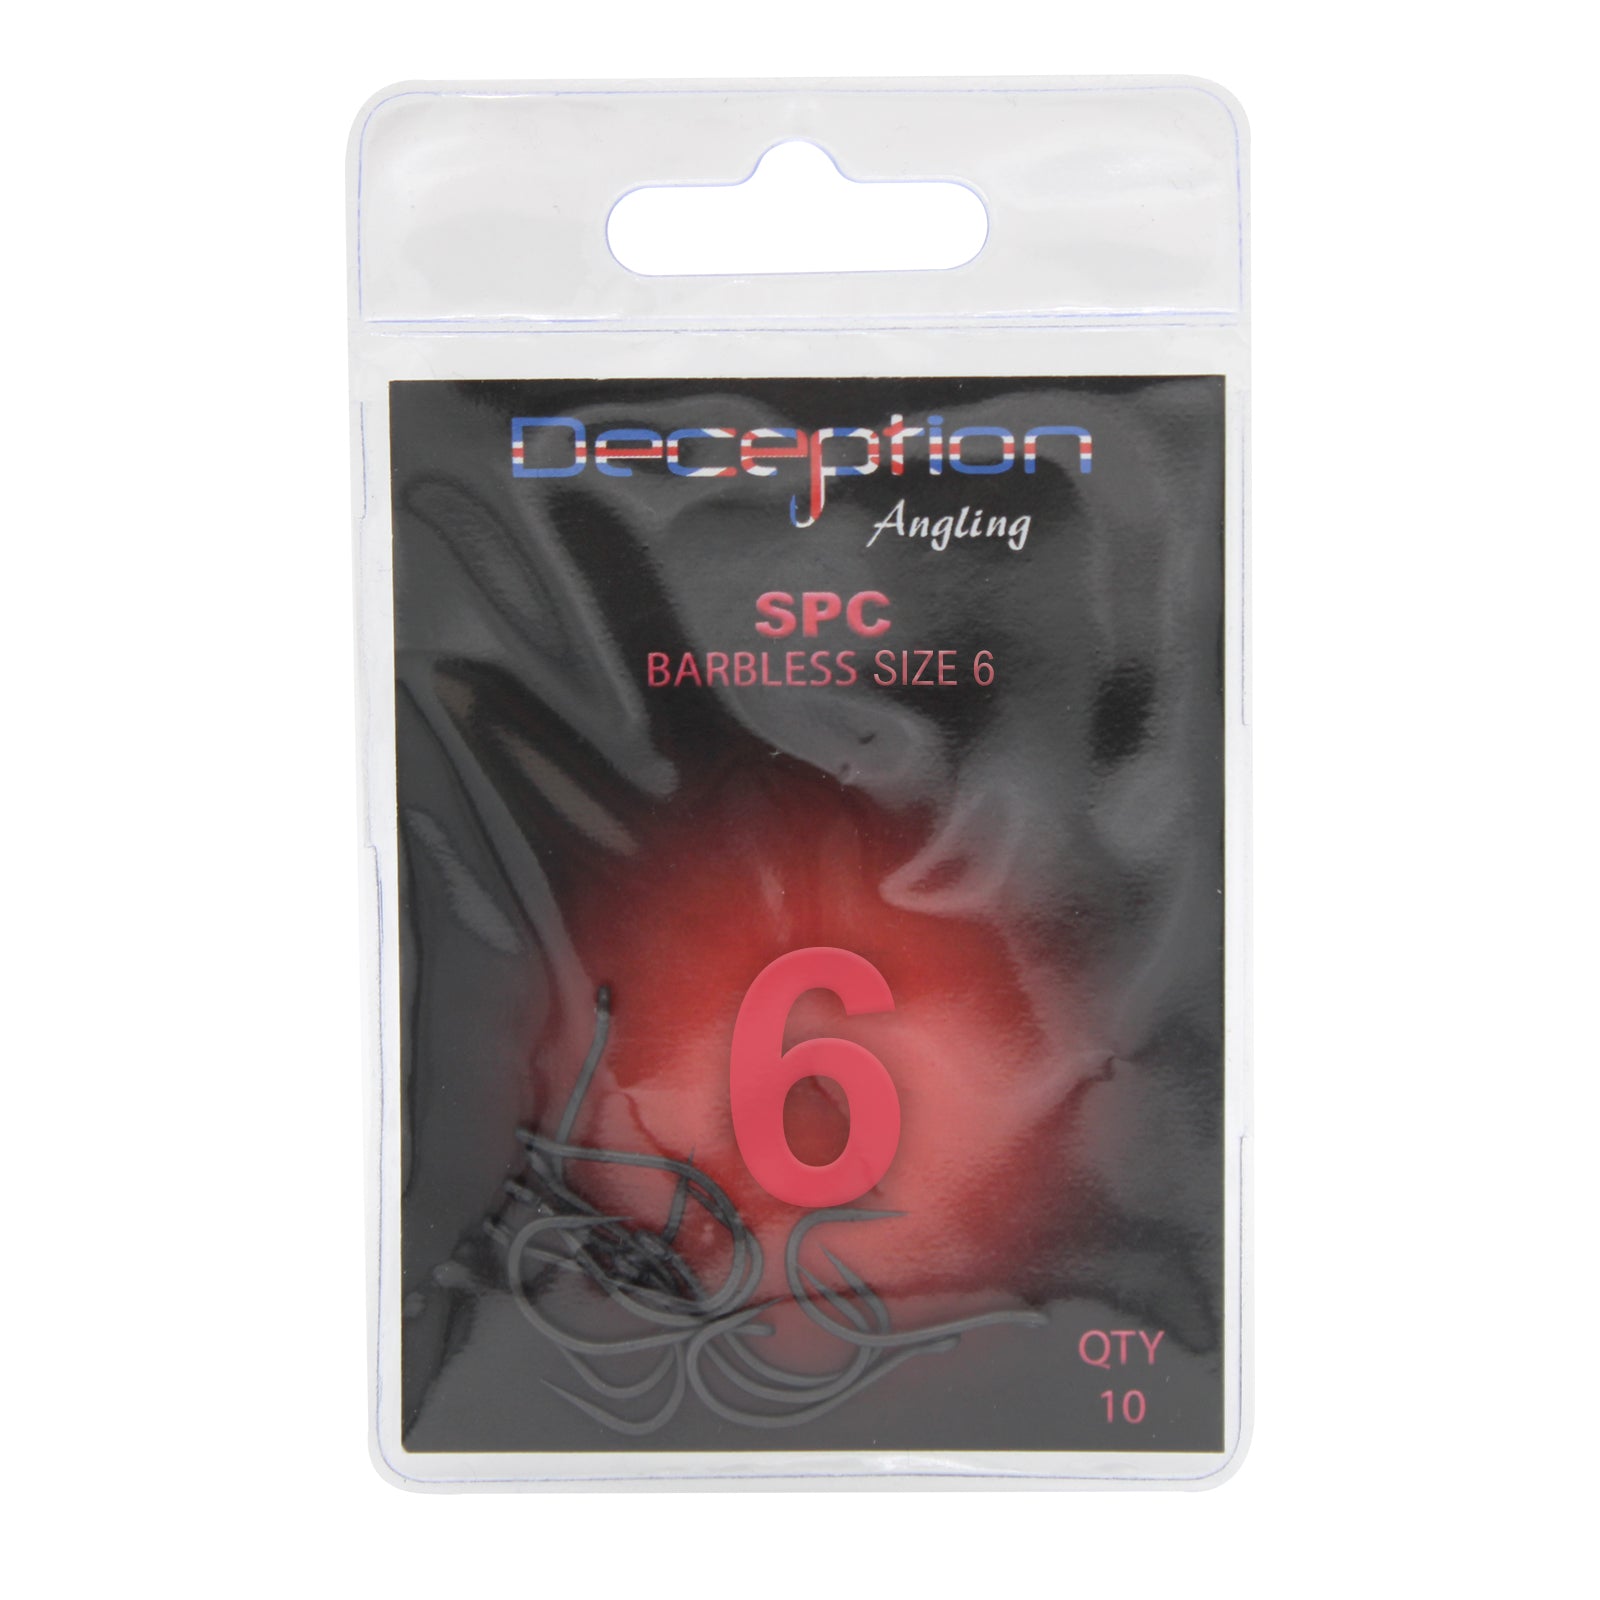 Deception Angling SPC Barbless Pack of 10 Fishing Hooks Size 6